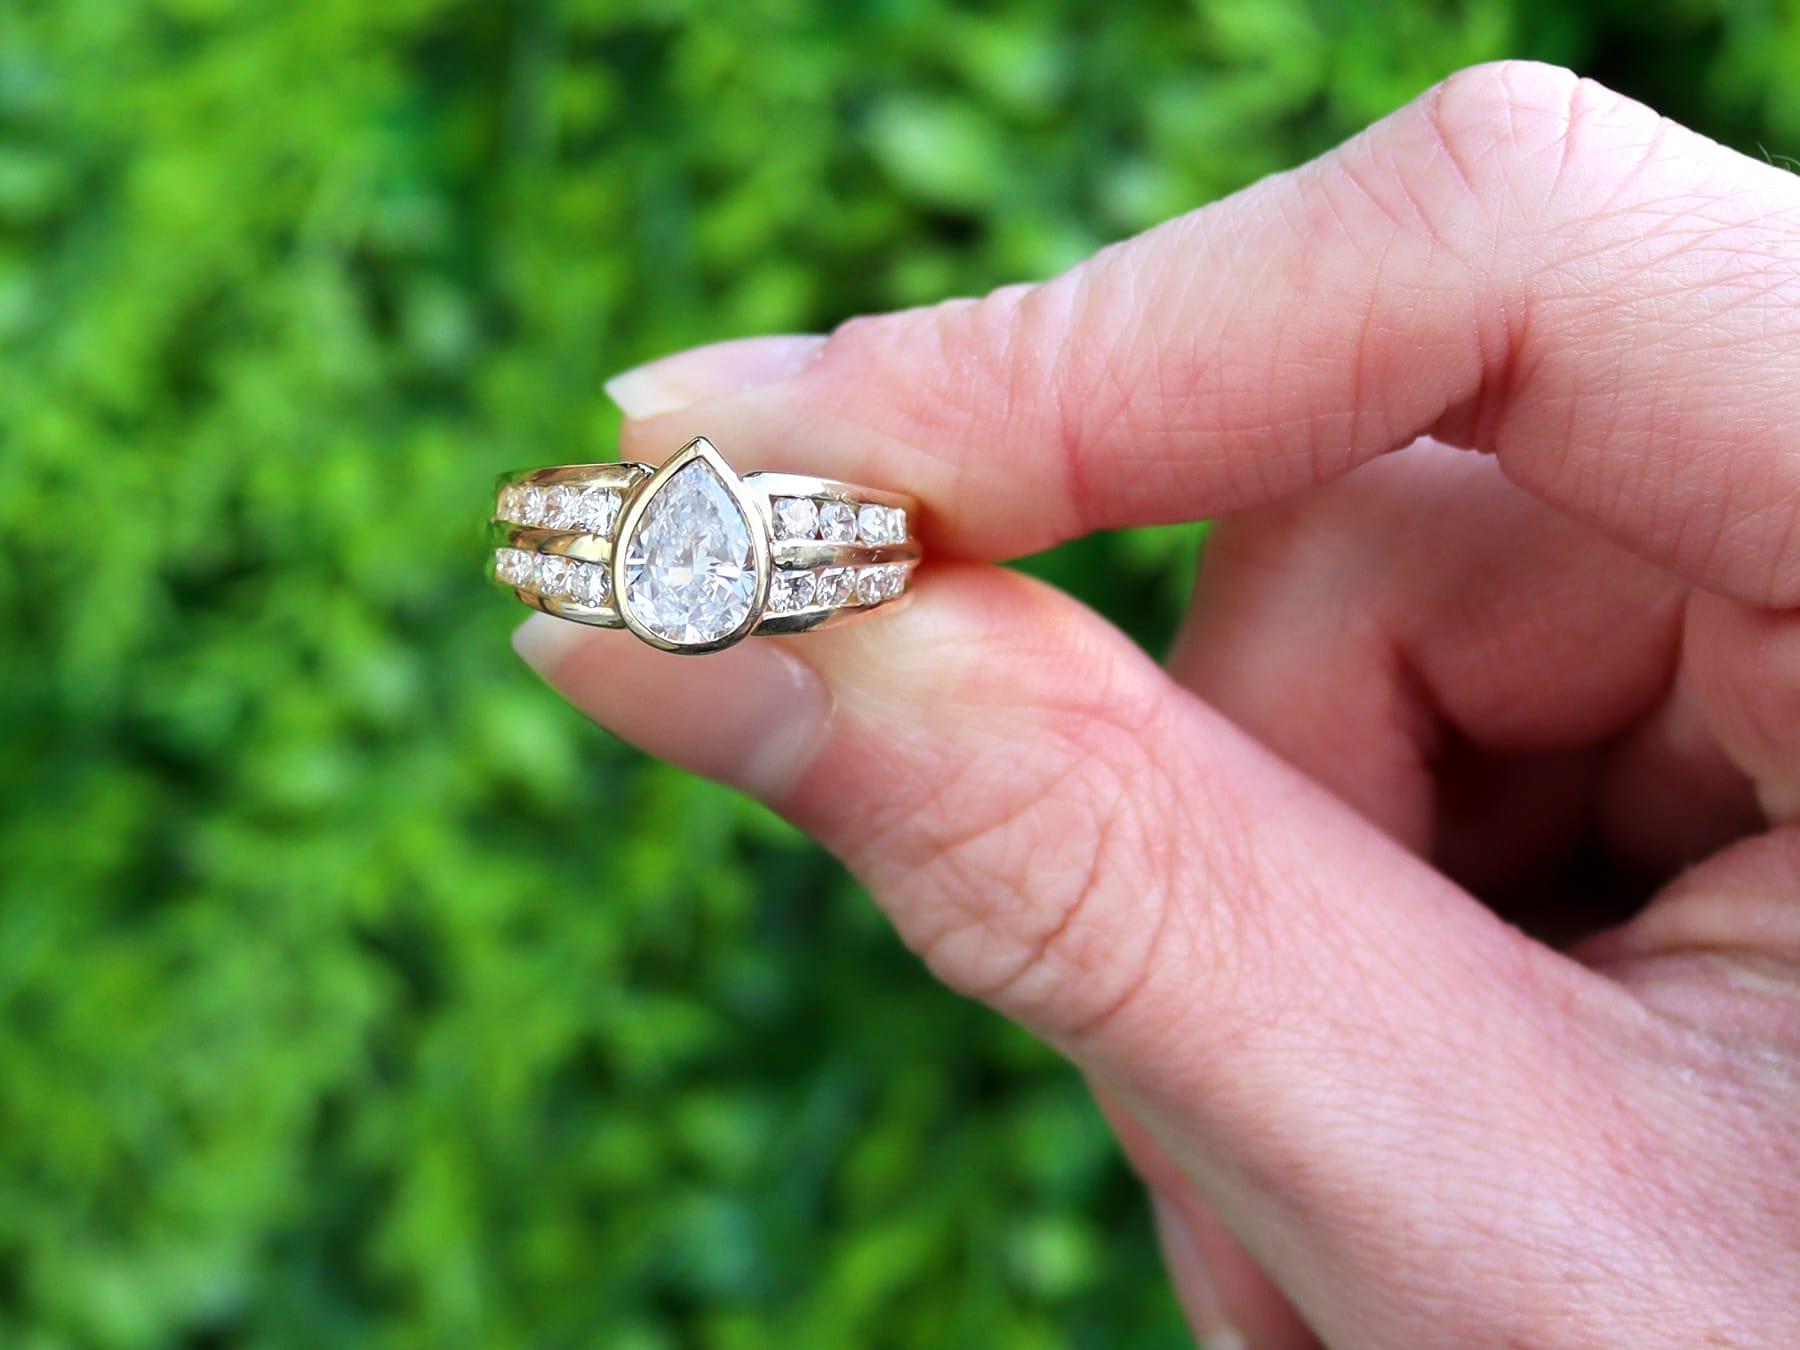 A stunning, fine and impressive, vintage pear cut diamond and 18 karat yellow gold solitaire ring: part of our vintage jewelry and jewelry collections.

This stunning, fine and impressive vintage ring has been crafted in 18k yellow gold.

The